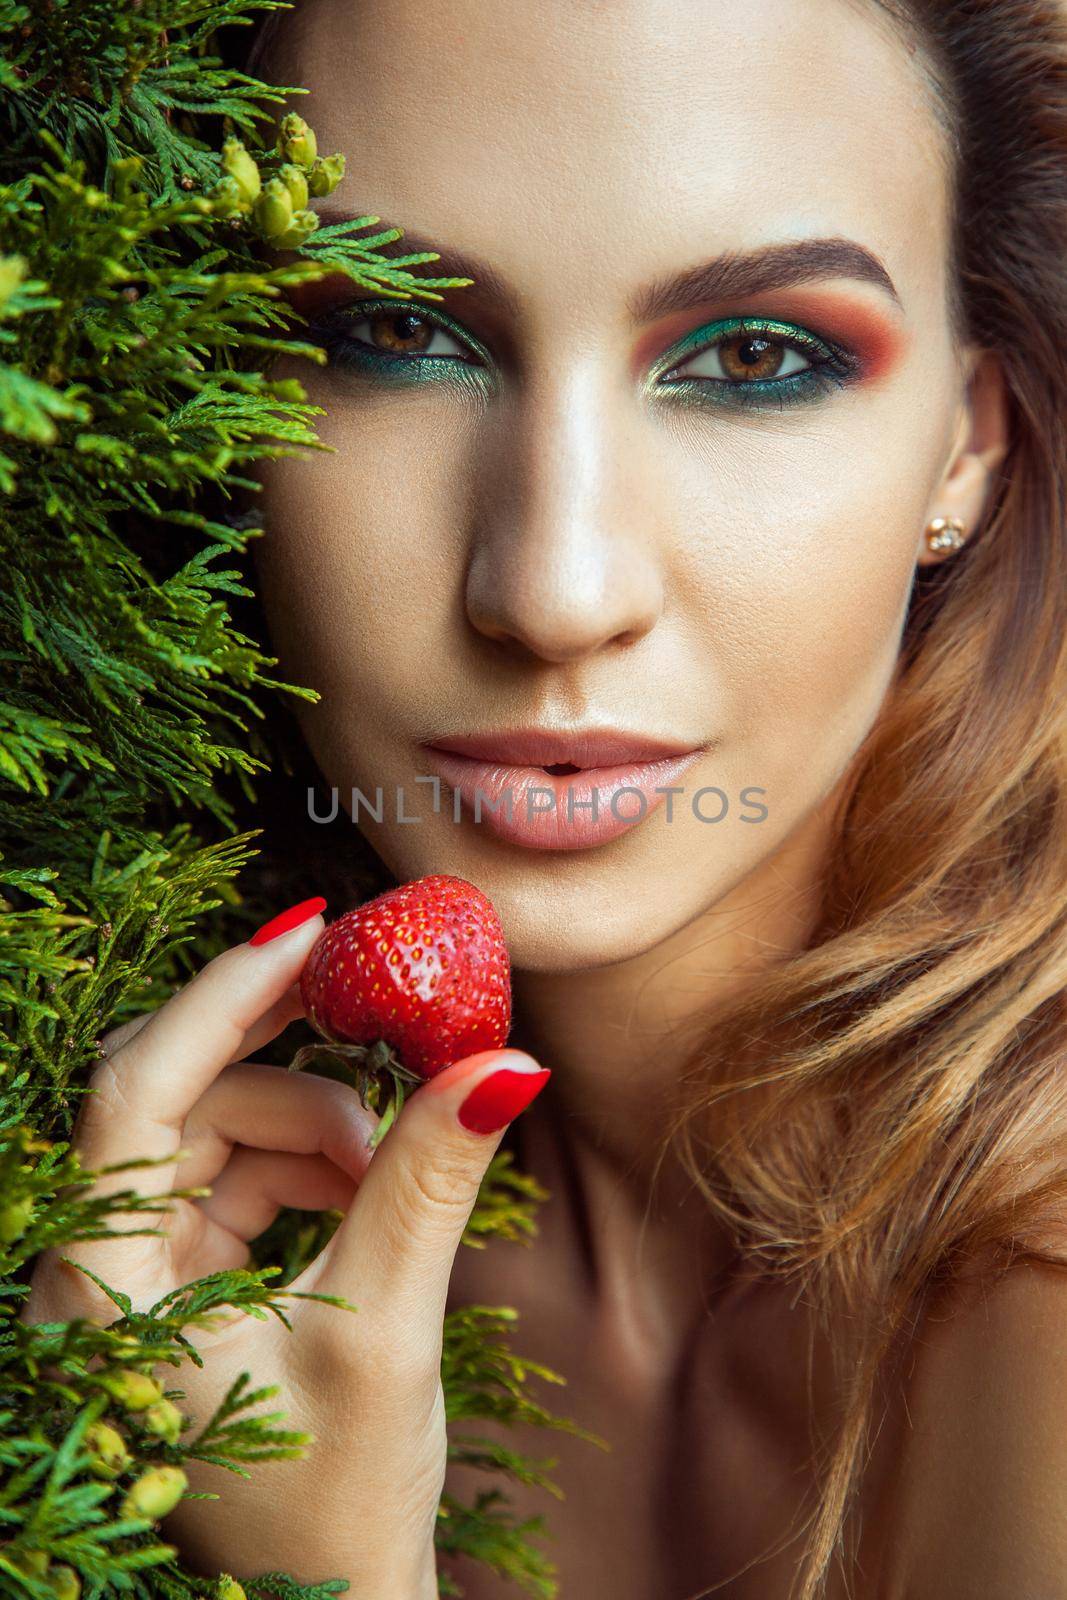 Handsome model with perfect green makeup looking at camera and holding red berry. Outdoor spring or summer photo